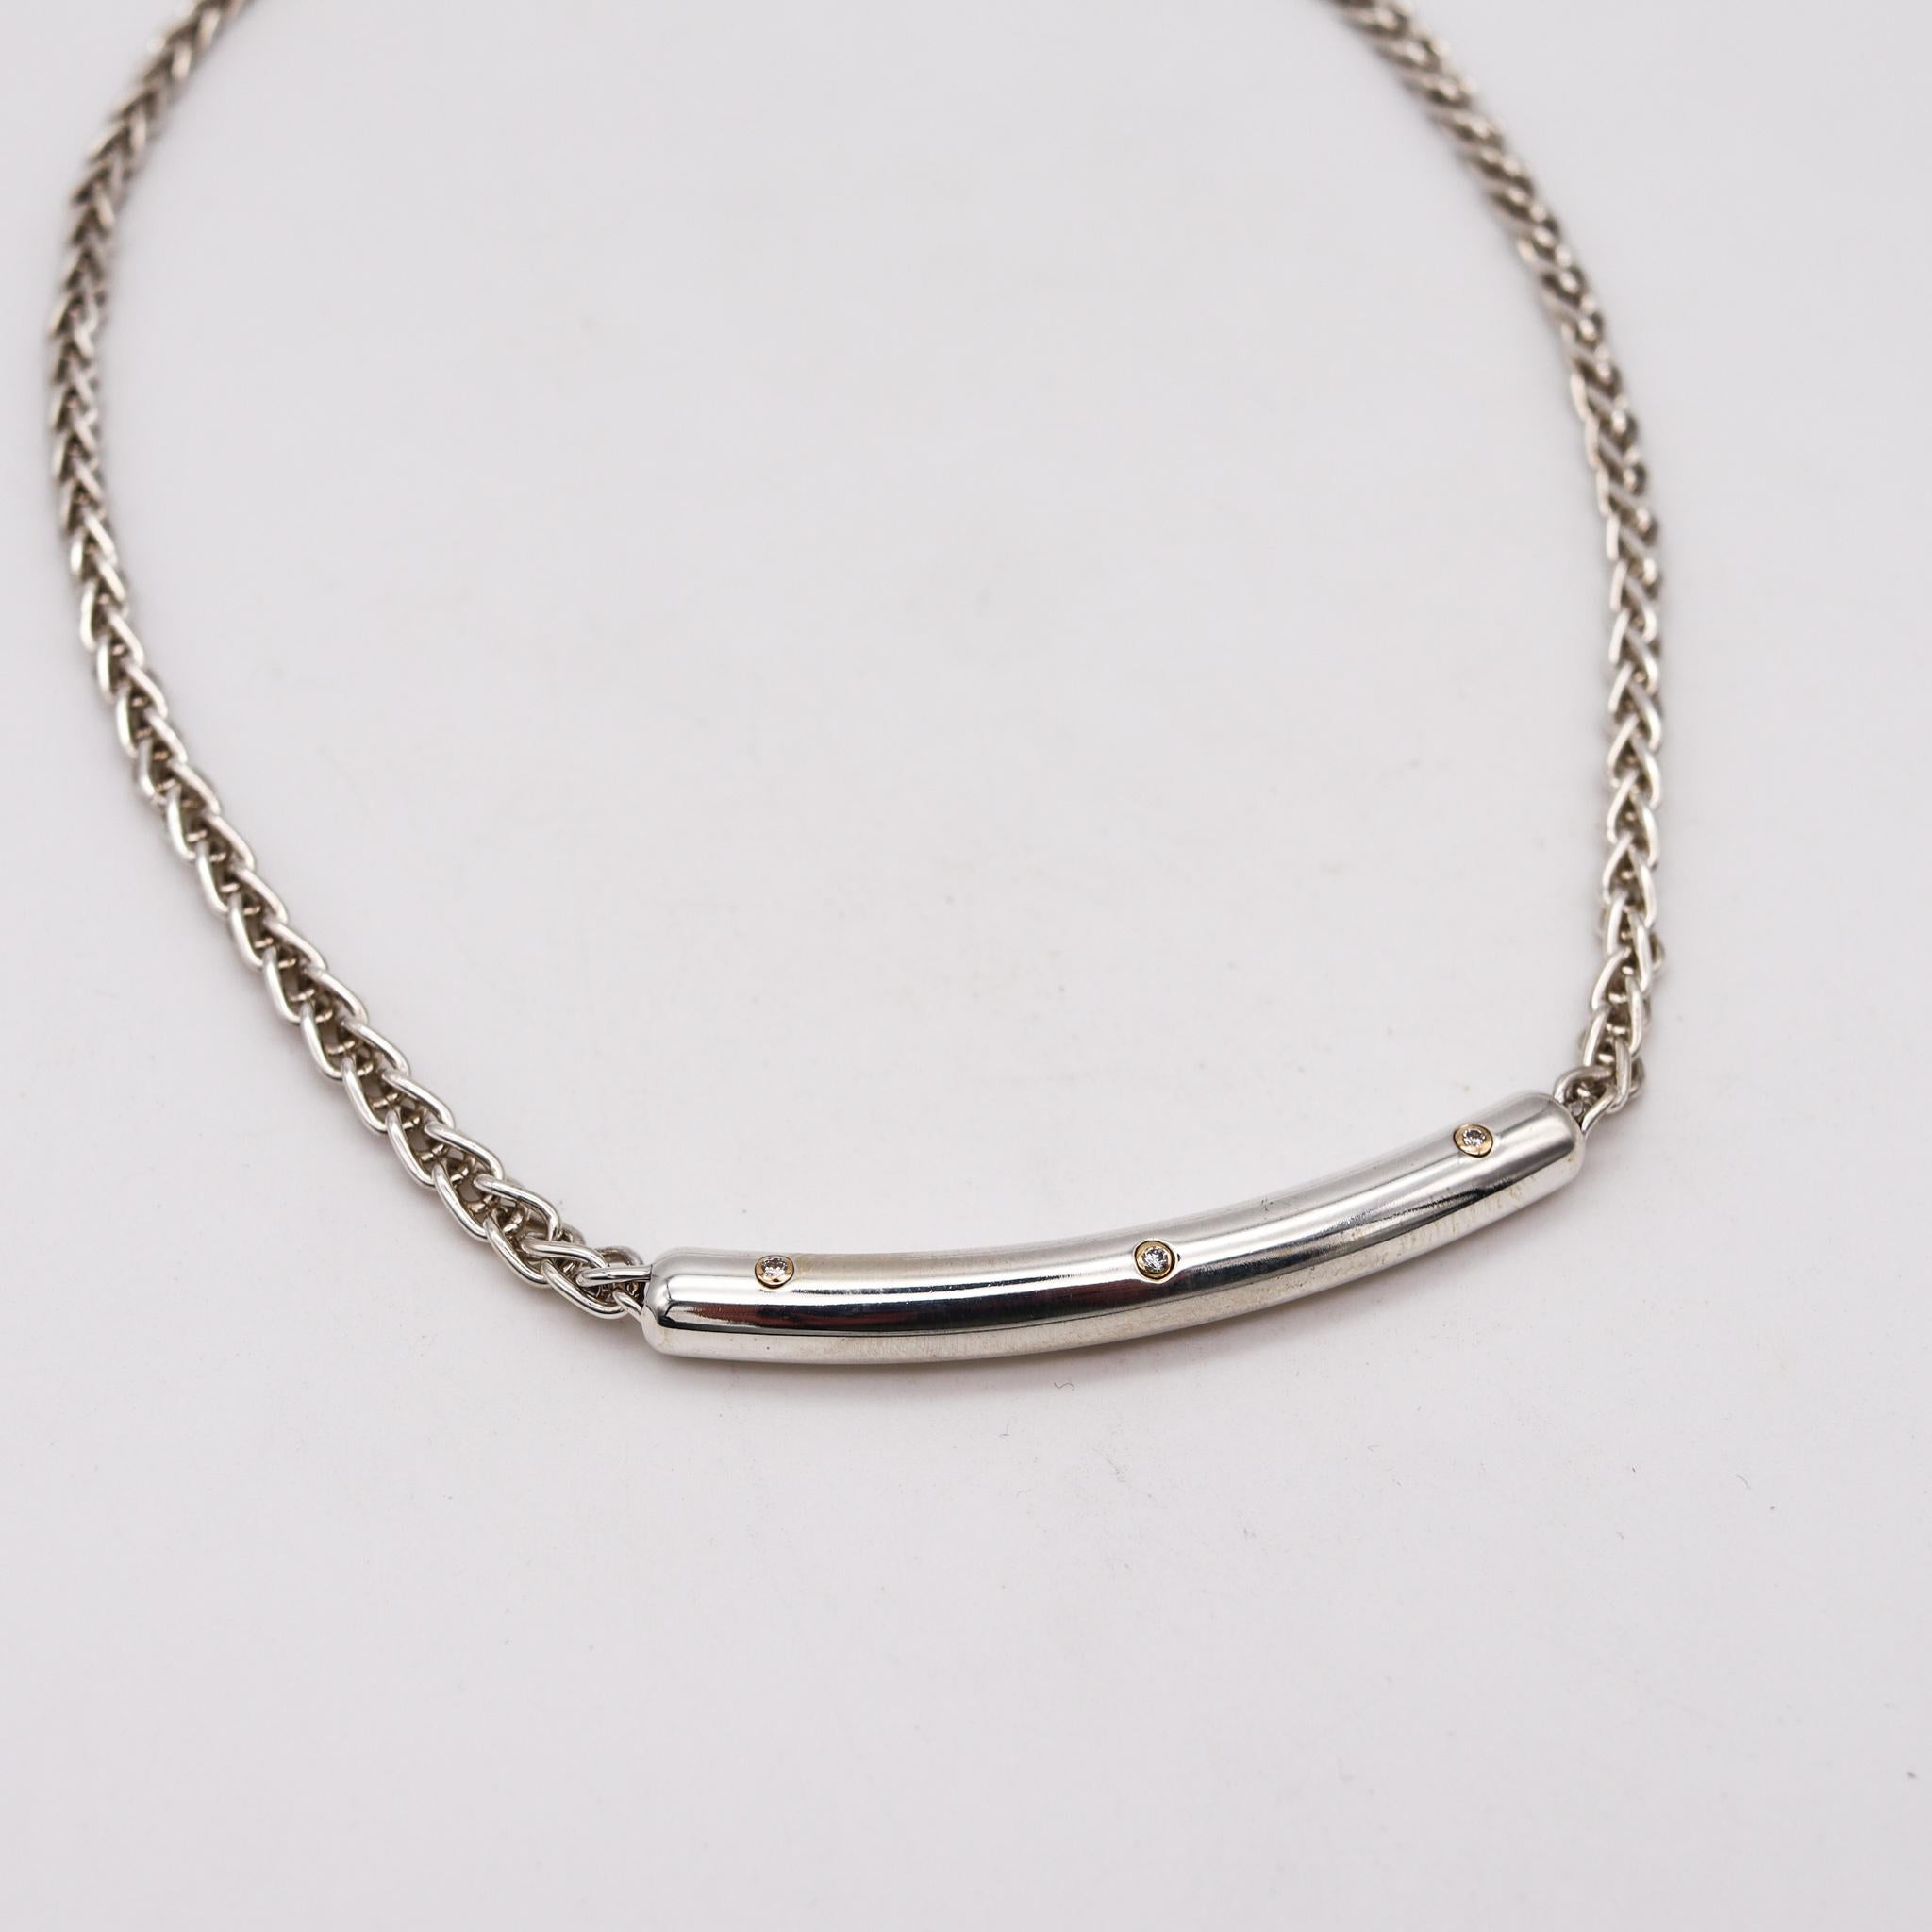 A necklace designed by Movado.

An elegant everyday piece, created by Movado in solid .925/.999 sterling silver, with accents in 18 karats yellow gold and is finished with very high polish. Fitted the center with a tubular curved element attached to